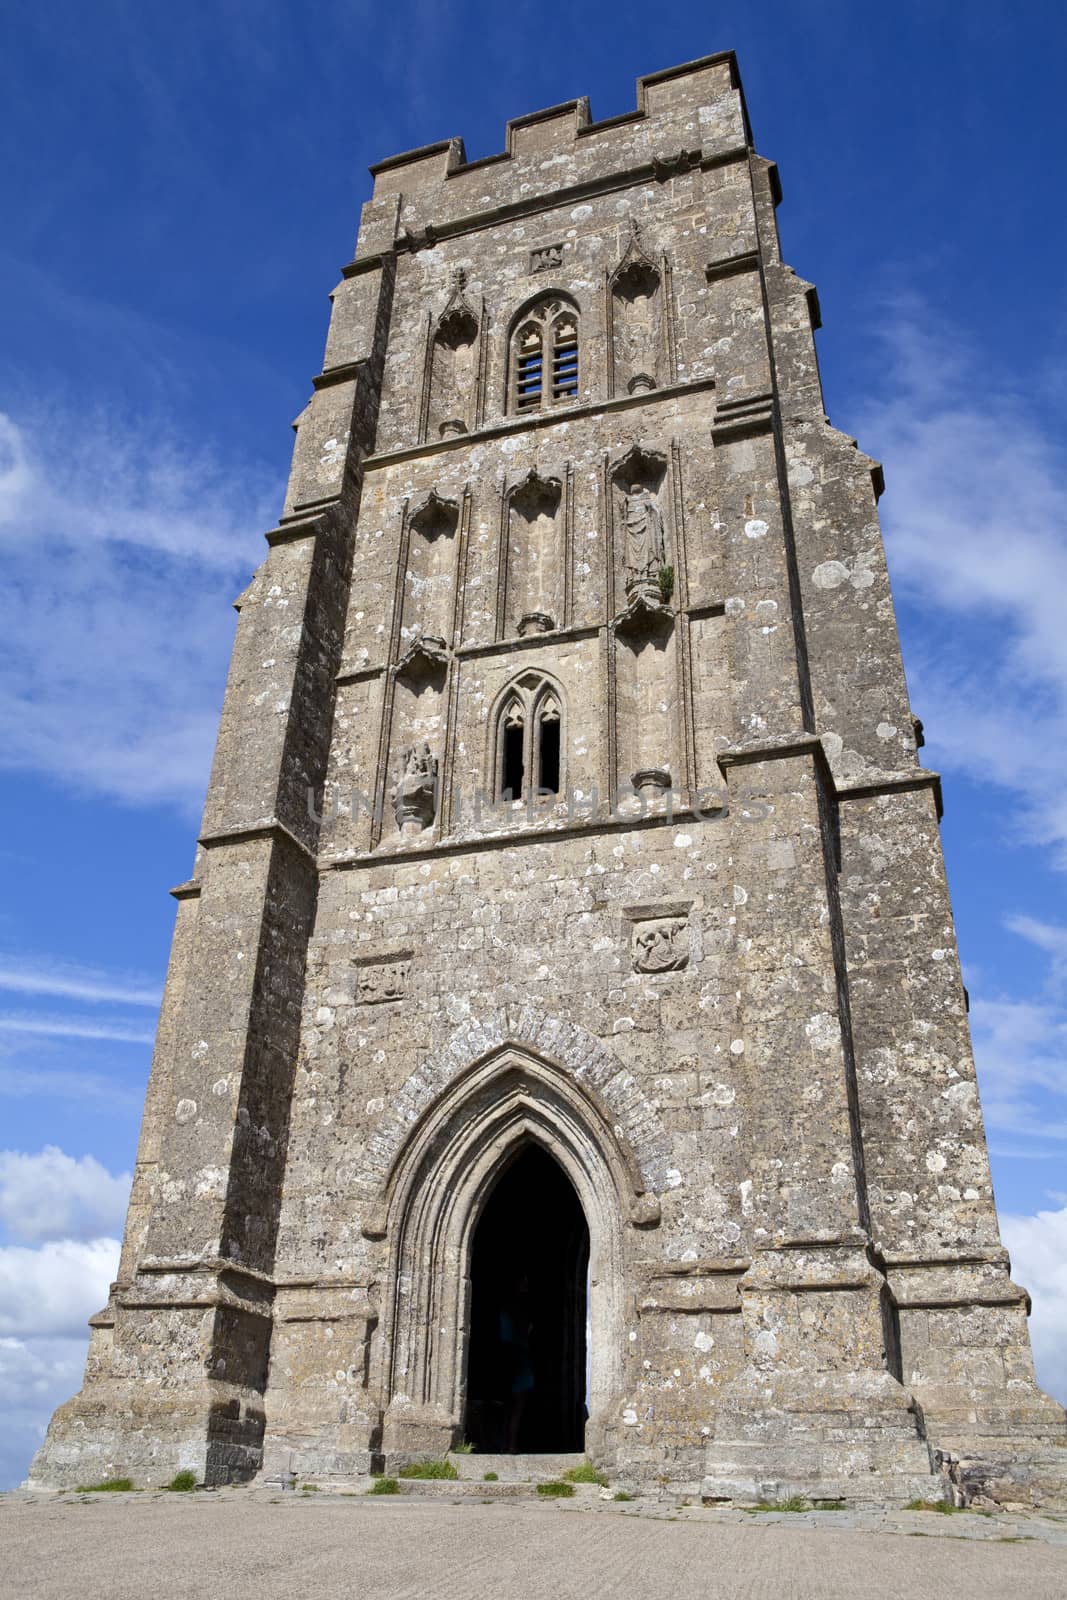 St. Michaels Tower on Glastonbury Tor in Somerset, England.